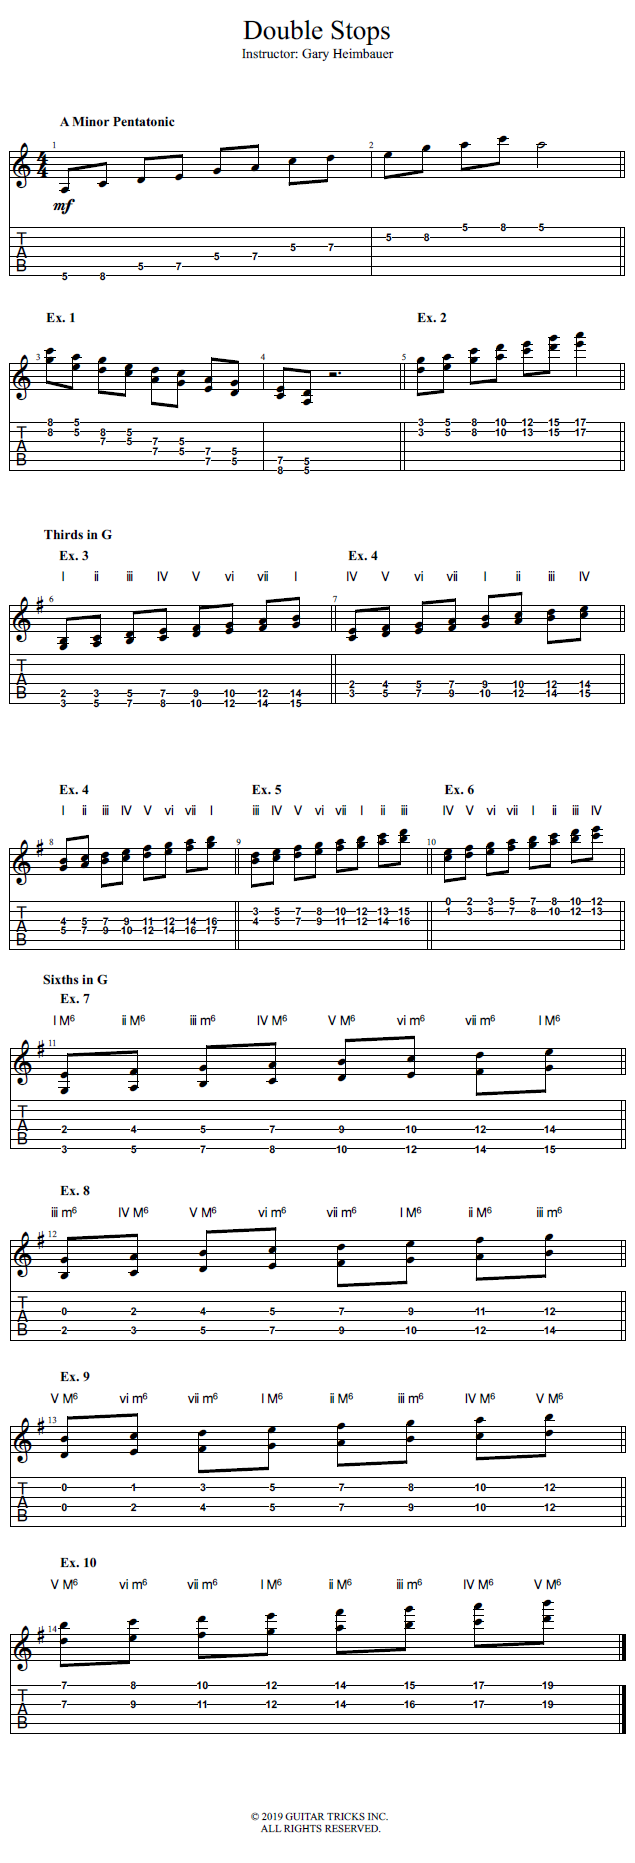 Double Stops song notation